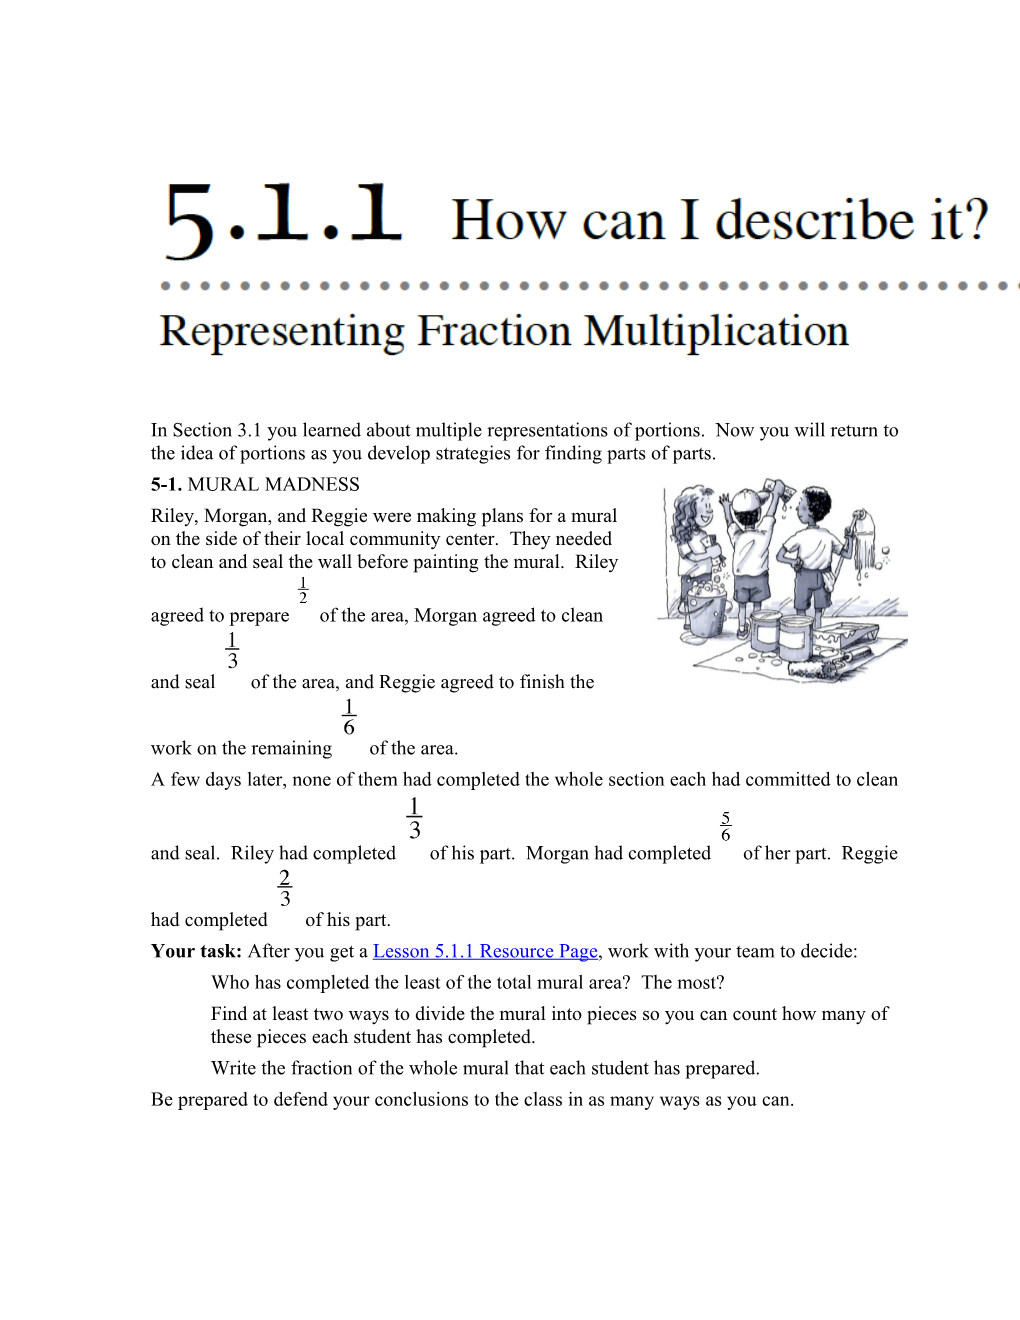 In Section 3.1 You Learned About Multiple Representations of Portions. Now You Will Return